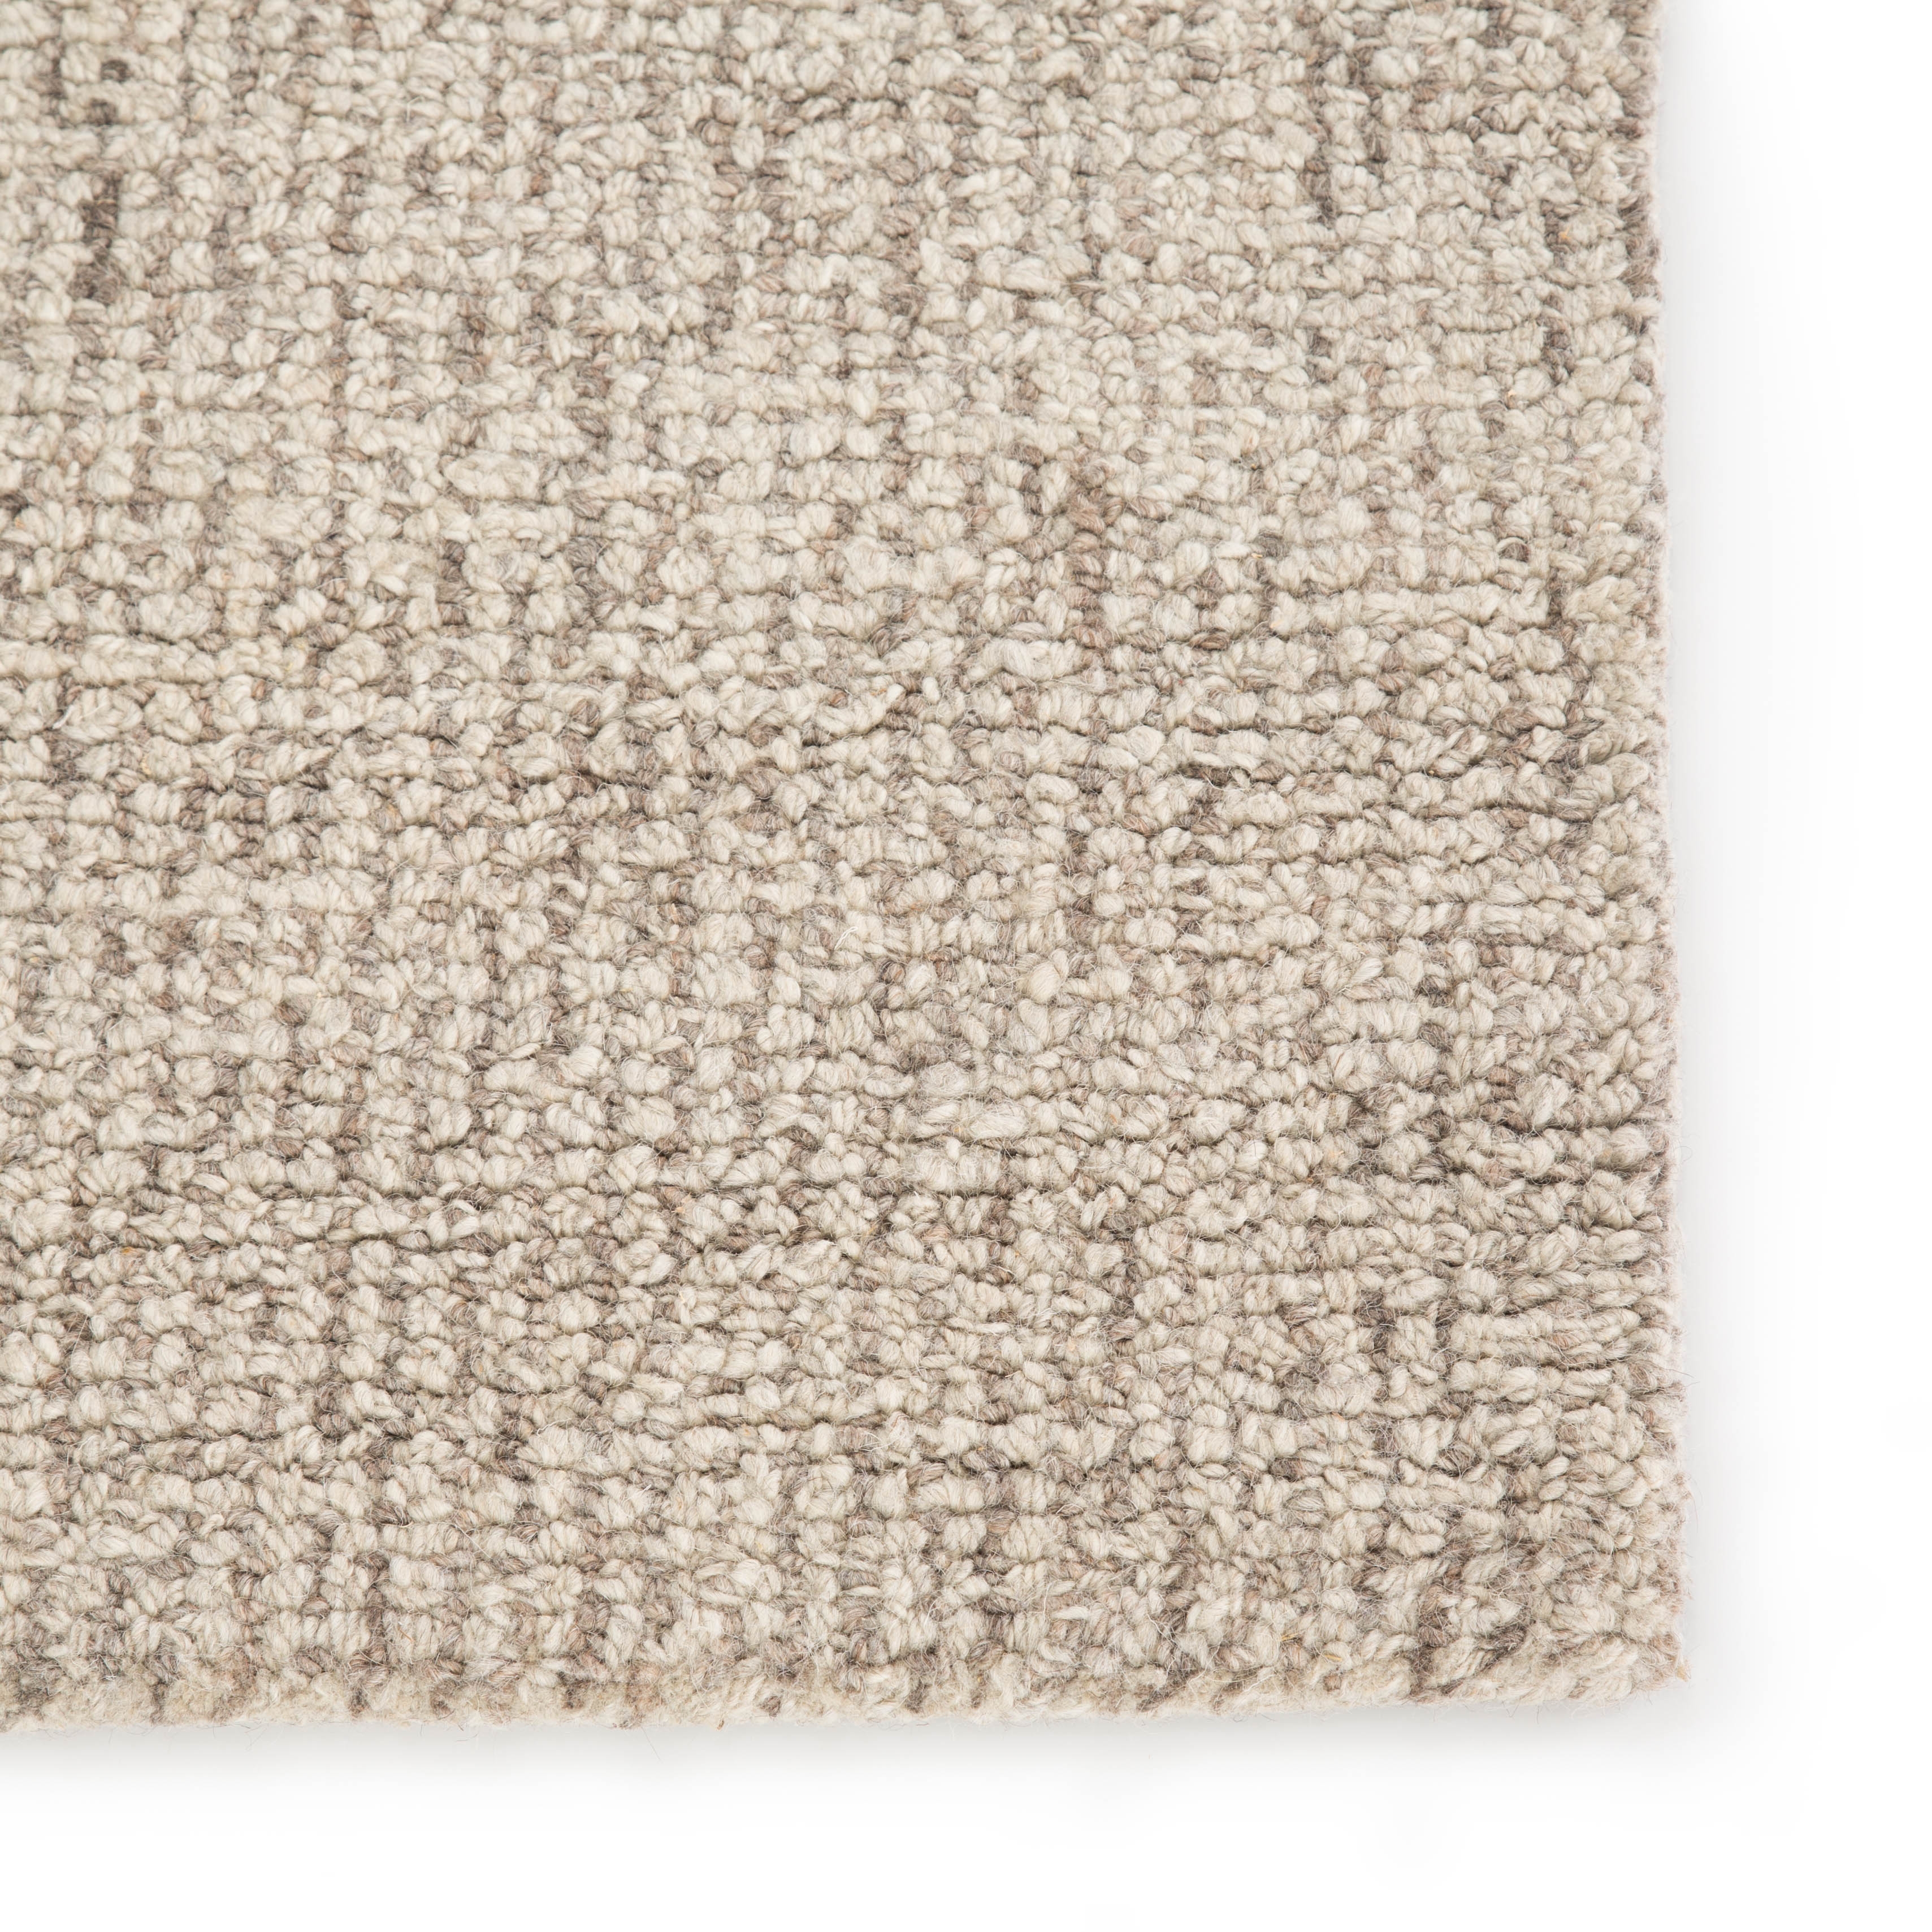 Oland Handmade Solid White/ Brown Area Rug (12'X15') - Image 3